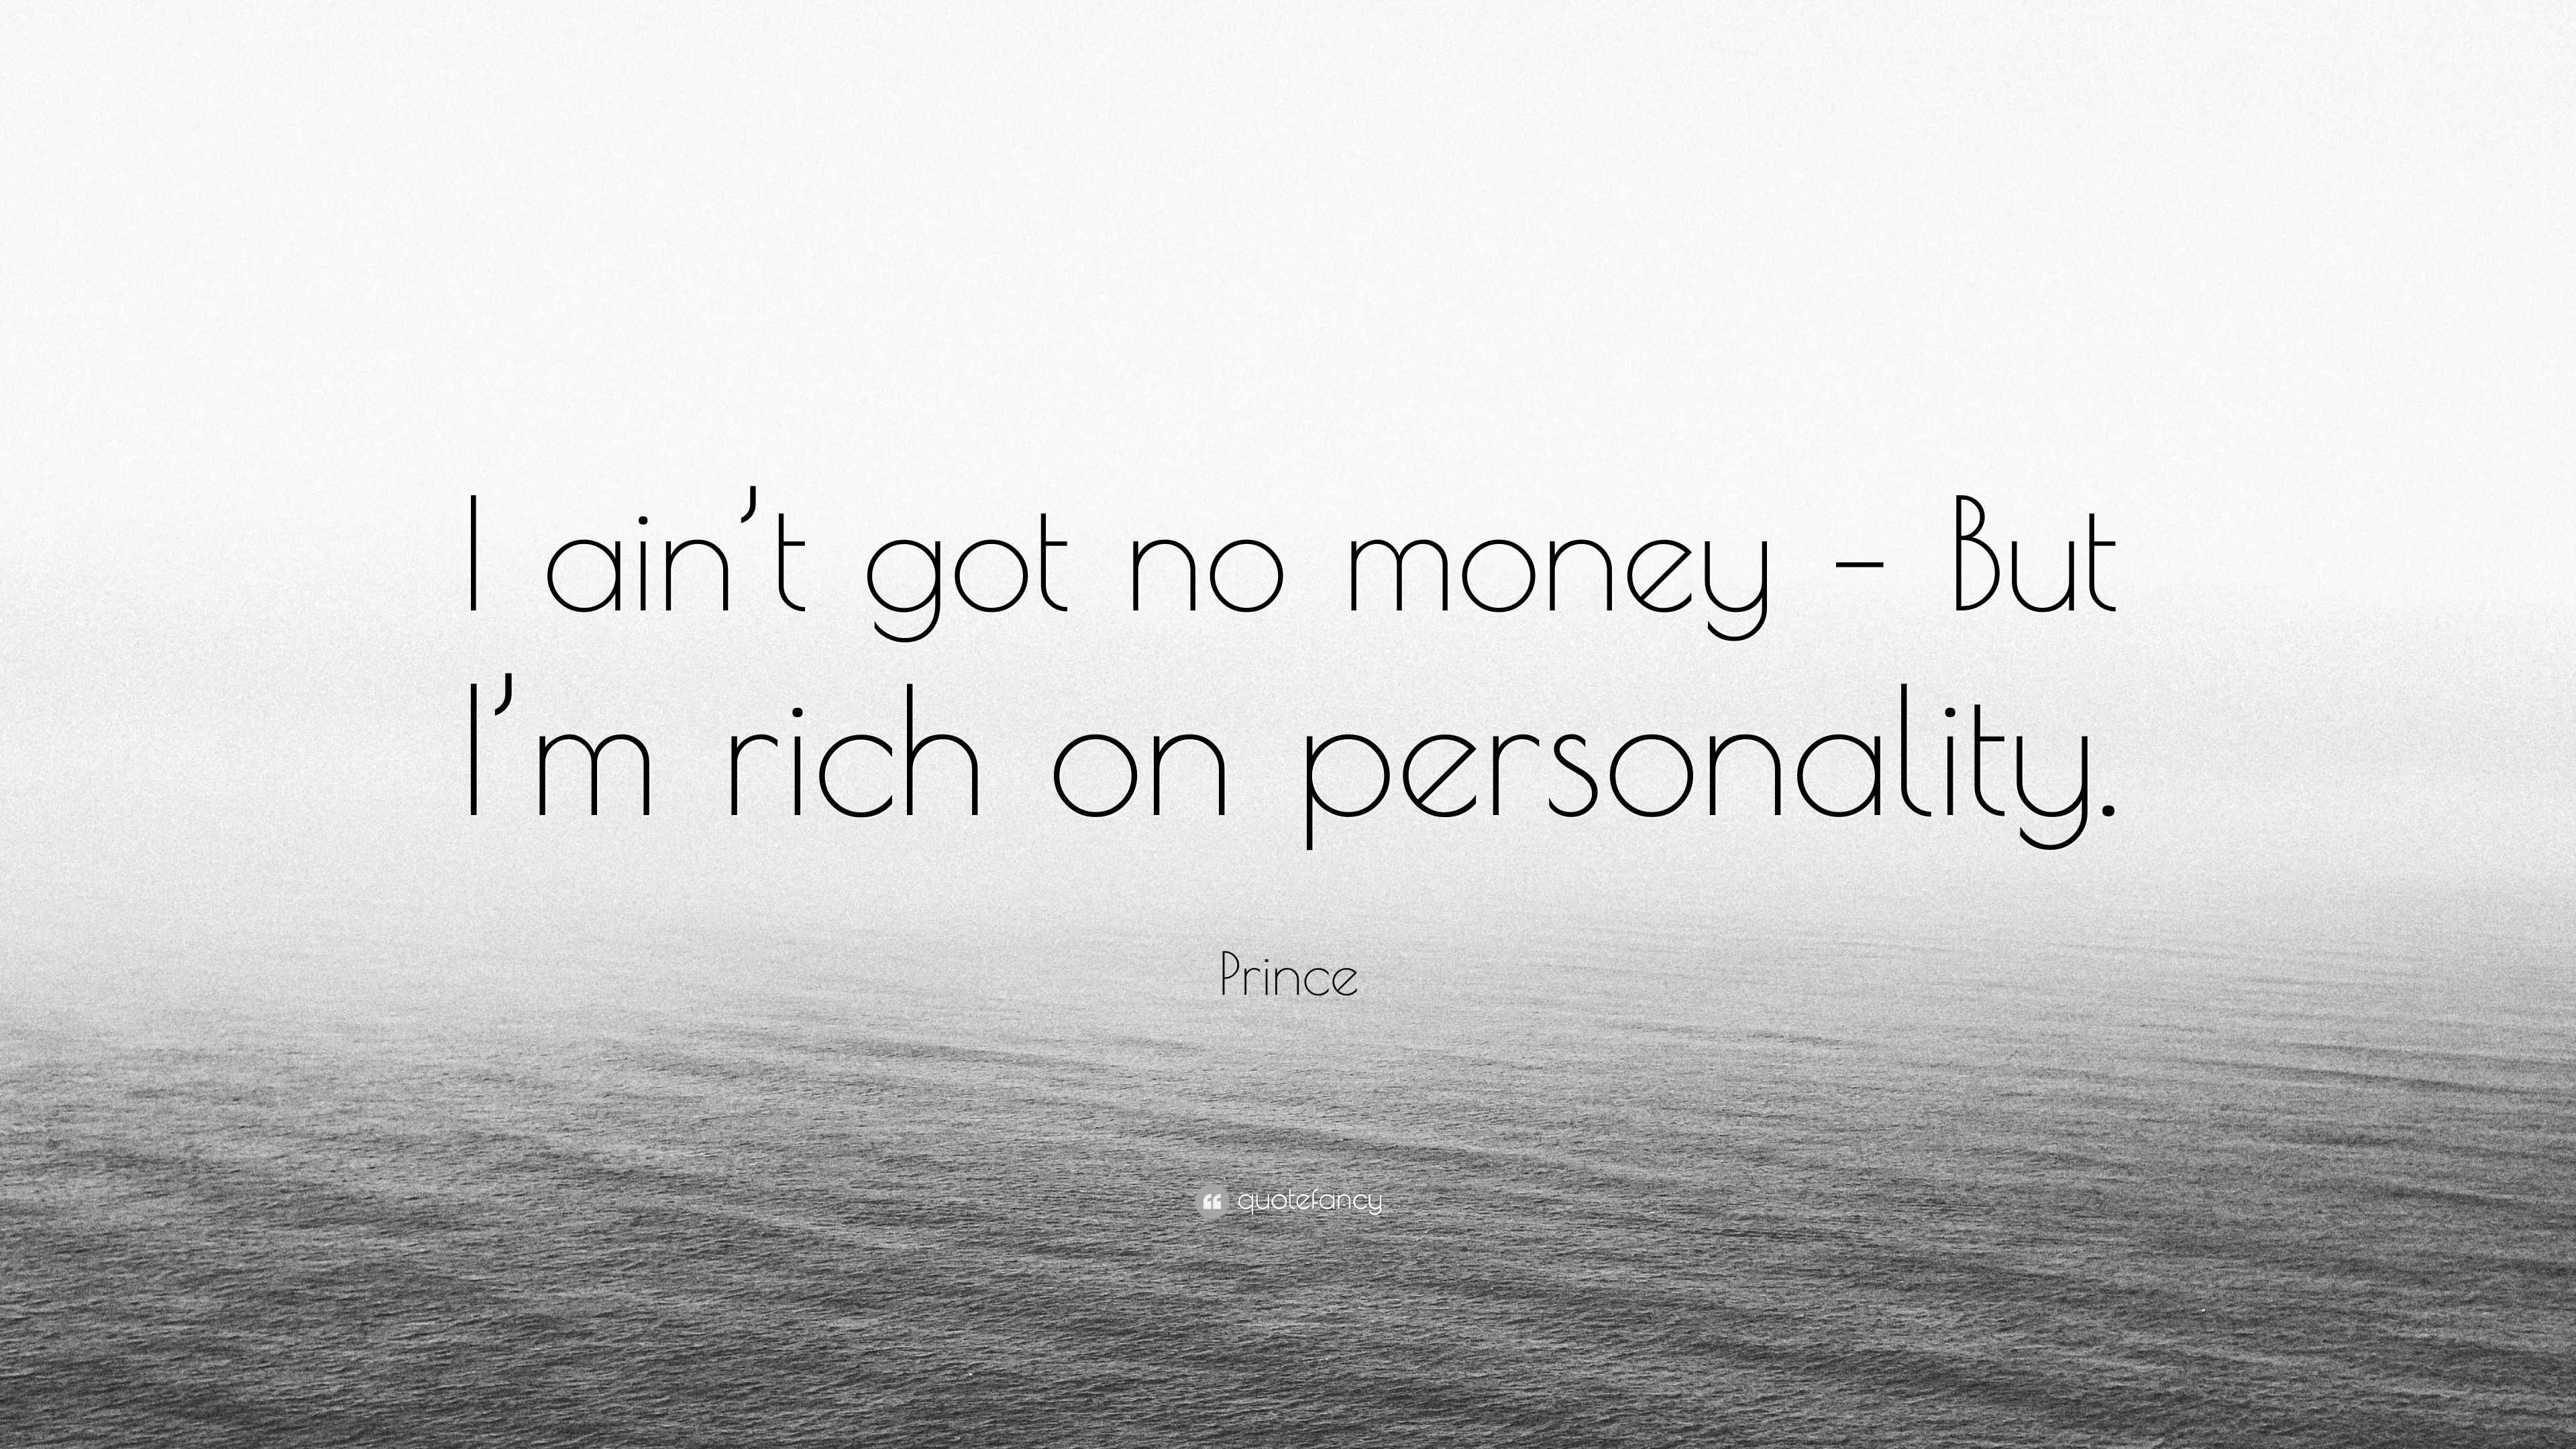 Prince Quote: “I ain’t got no money – But I’m rich on personality.” (12